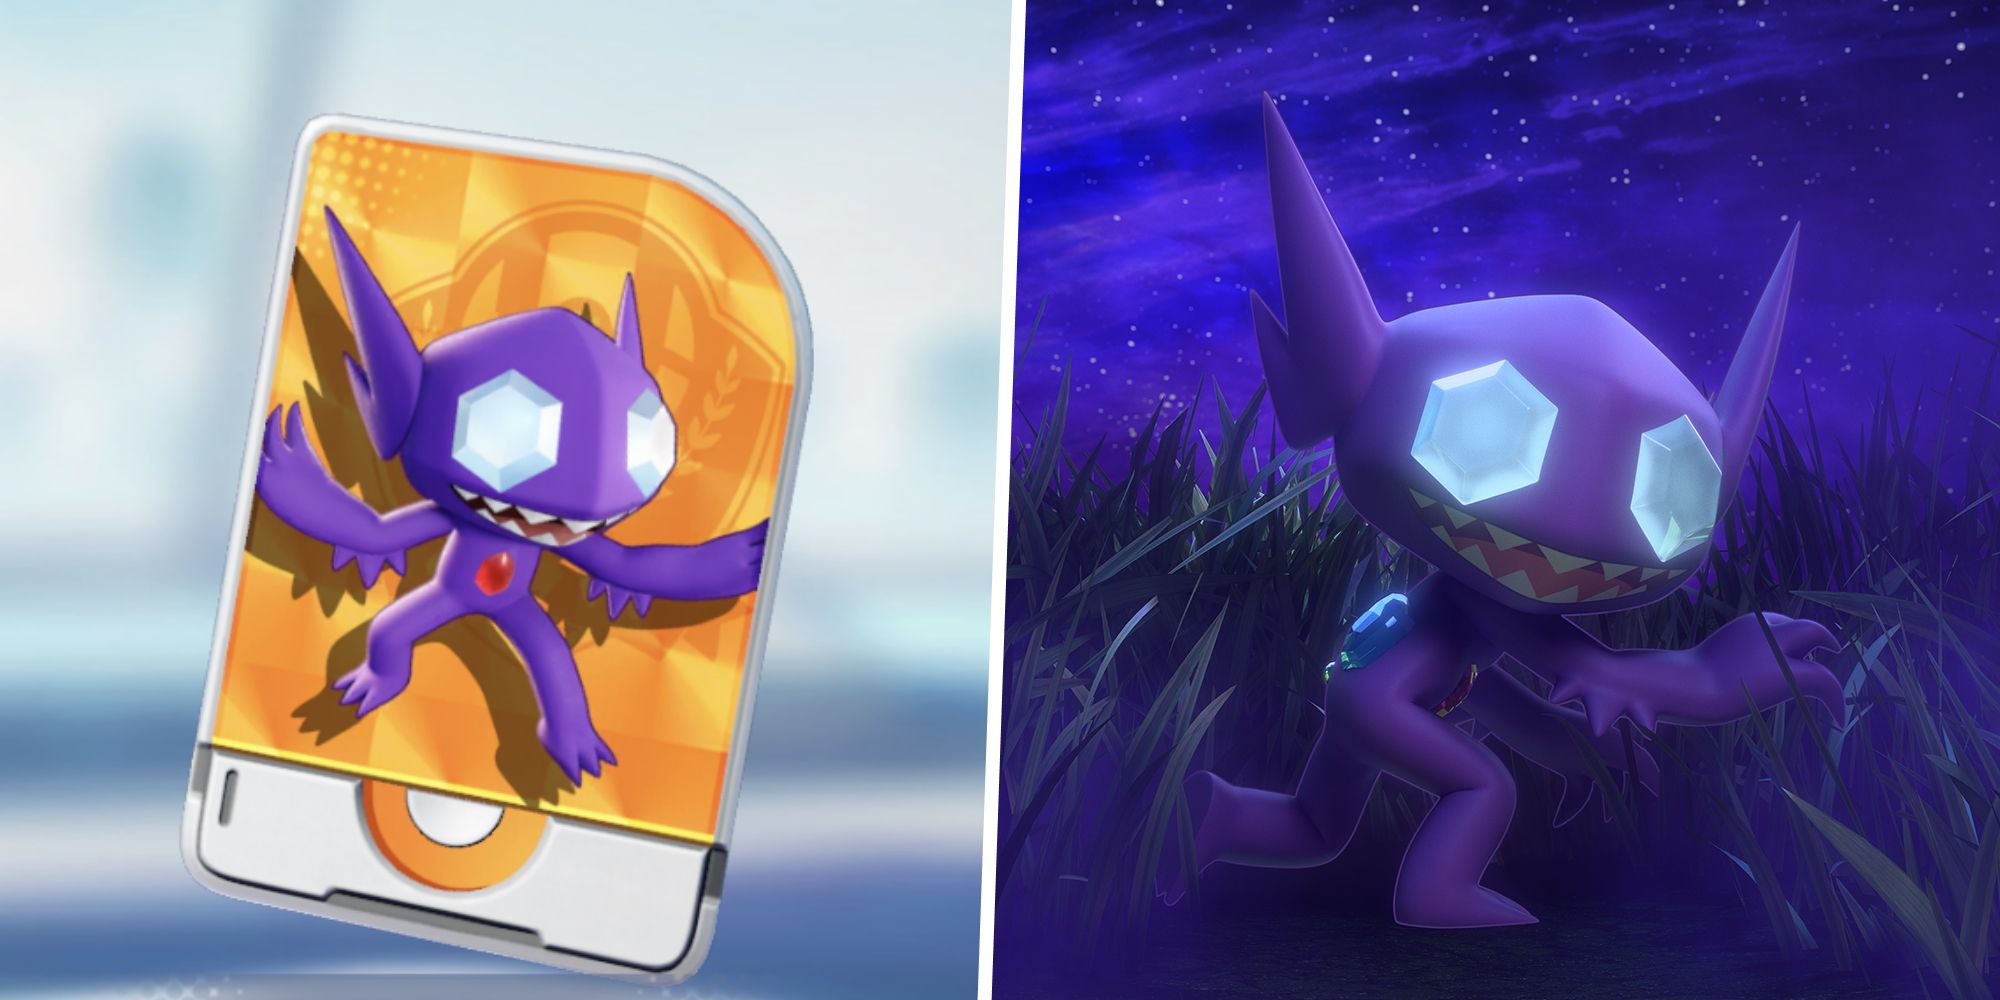 Sableye Unite License from Pokemon Unite split with an image of Sableye in tall grass